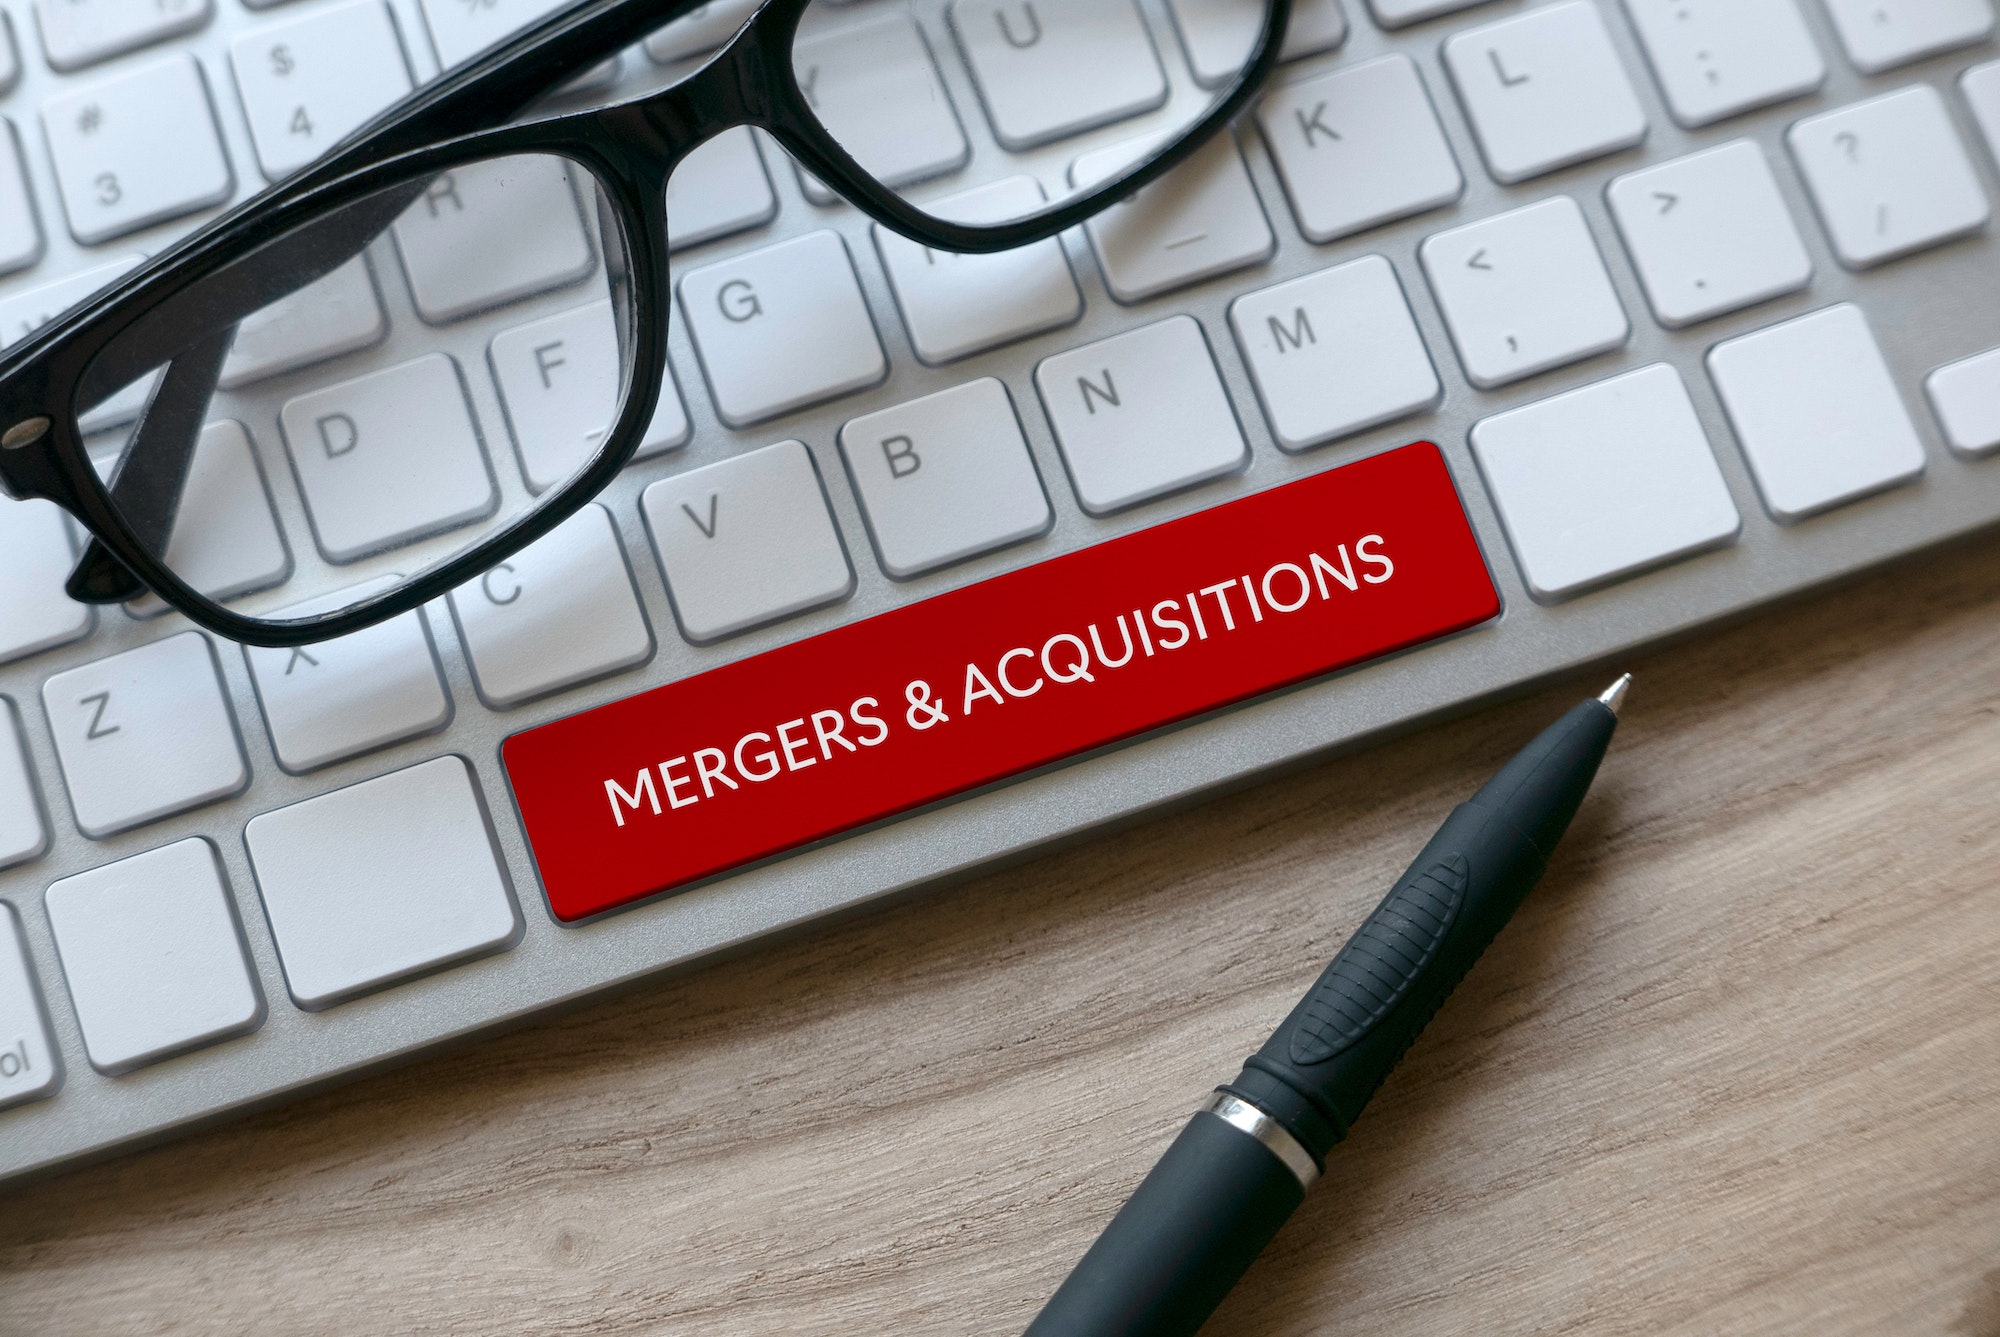 Best Practices for Conducting Cyber Mergers & Acquisitions